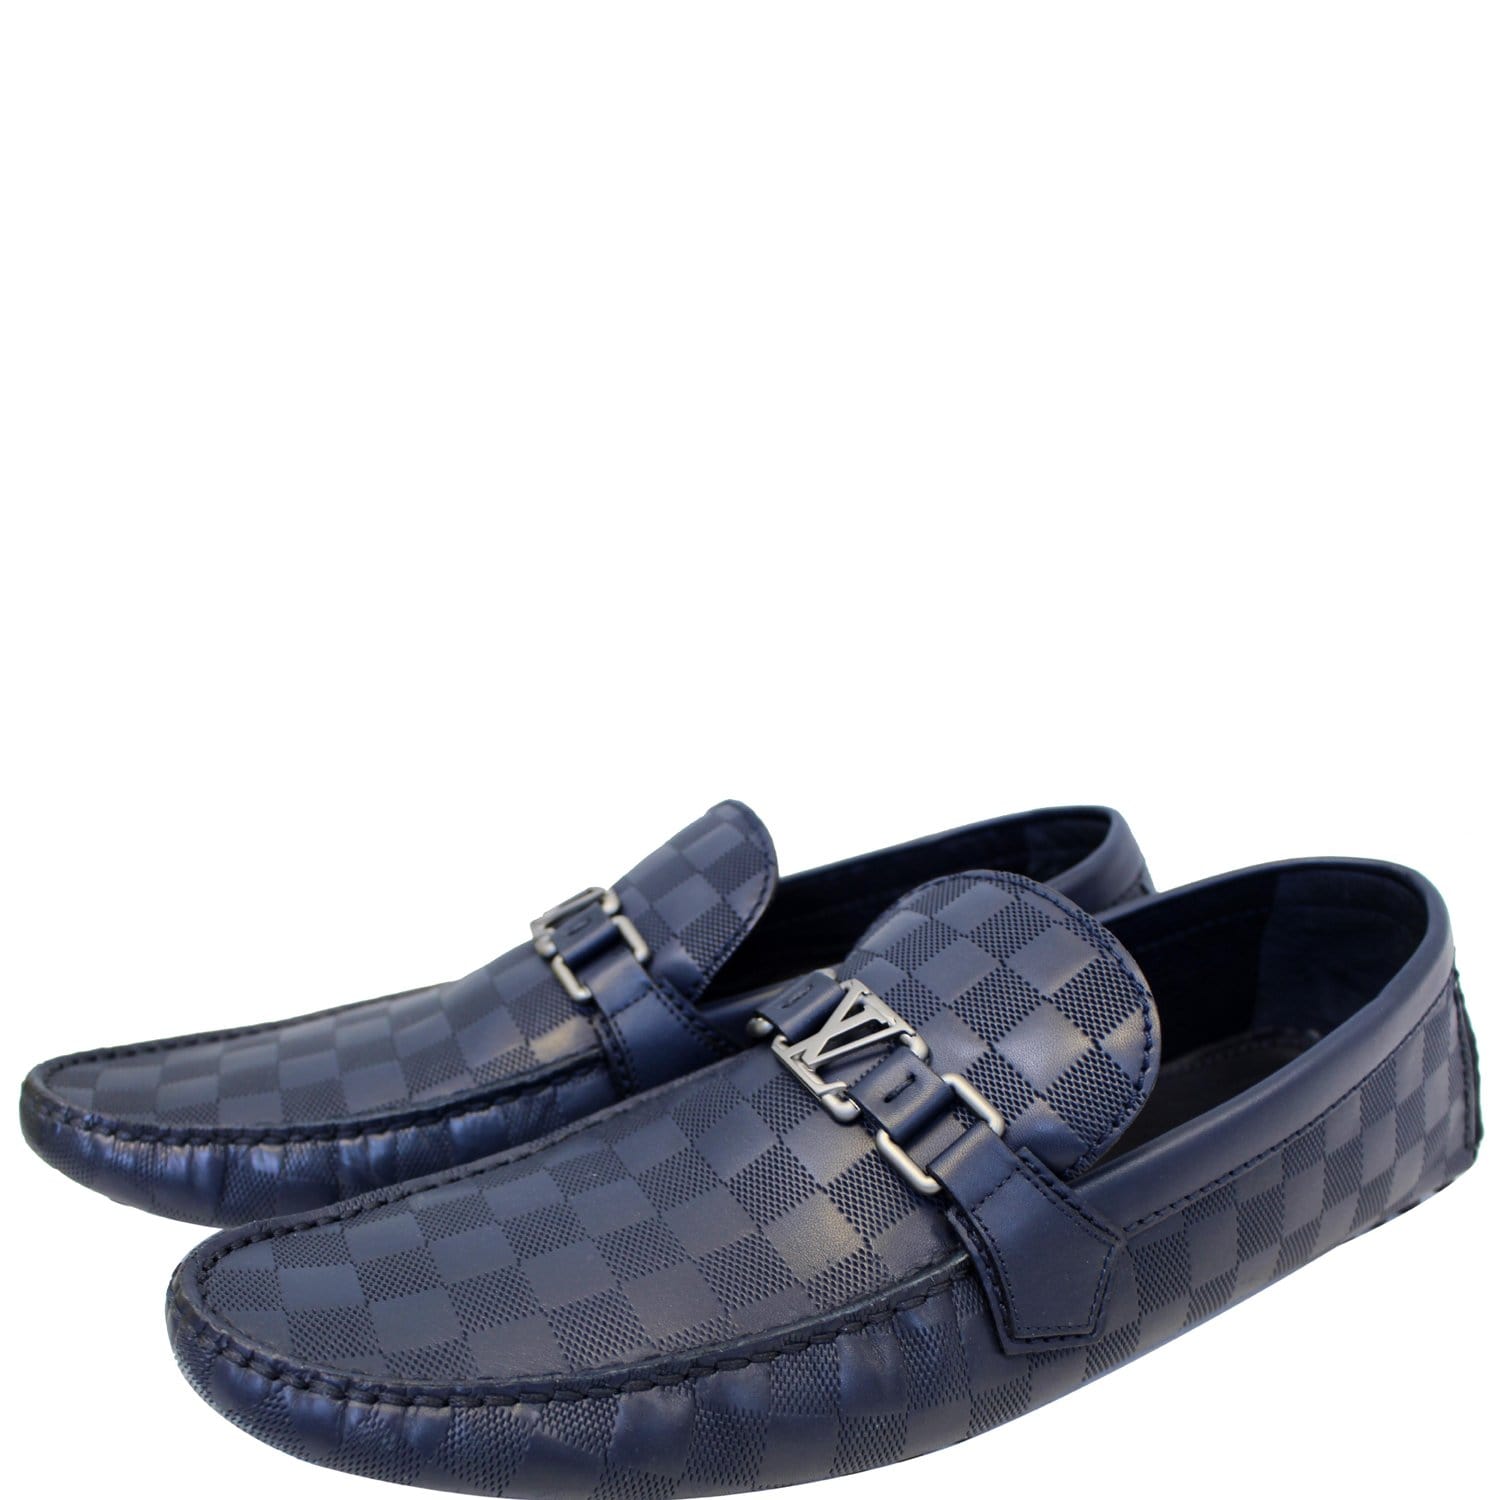 lv blue loafers